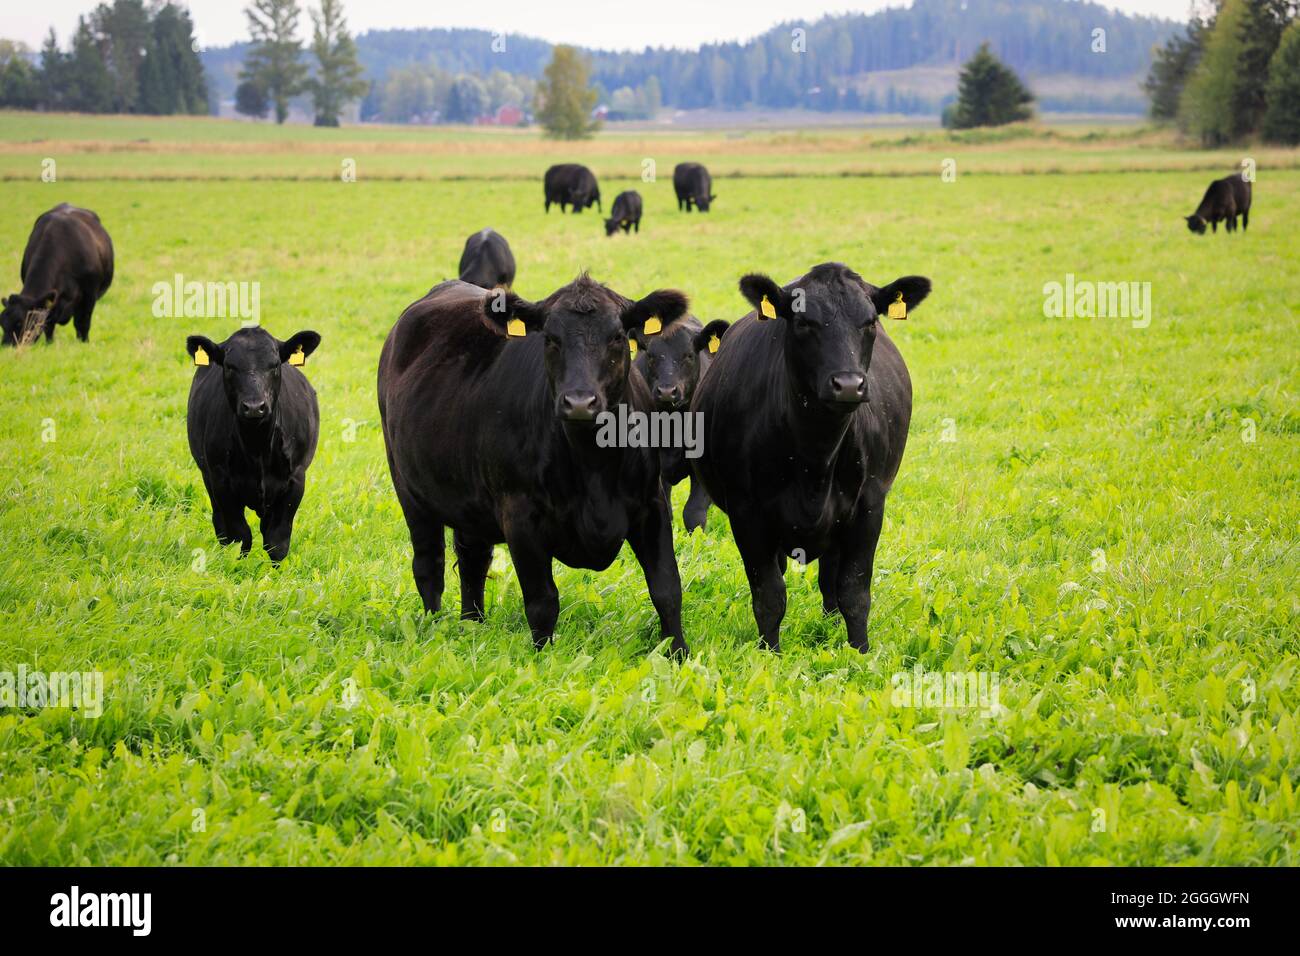 Black Aberdeen Angus cattle standing in green grassy field in Finland on a clear day of late summer. Angus is a Scottish breed of beef cattle. Stock Photo